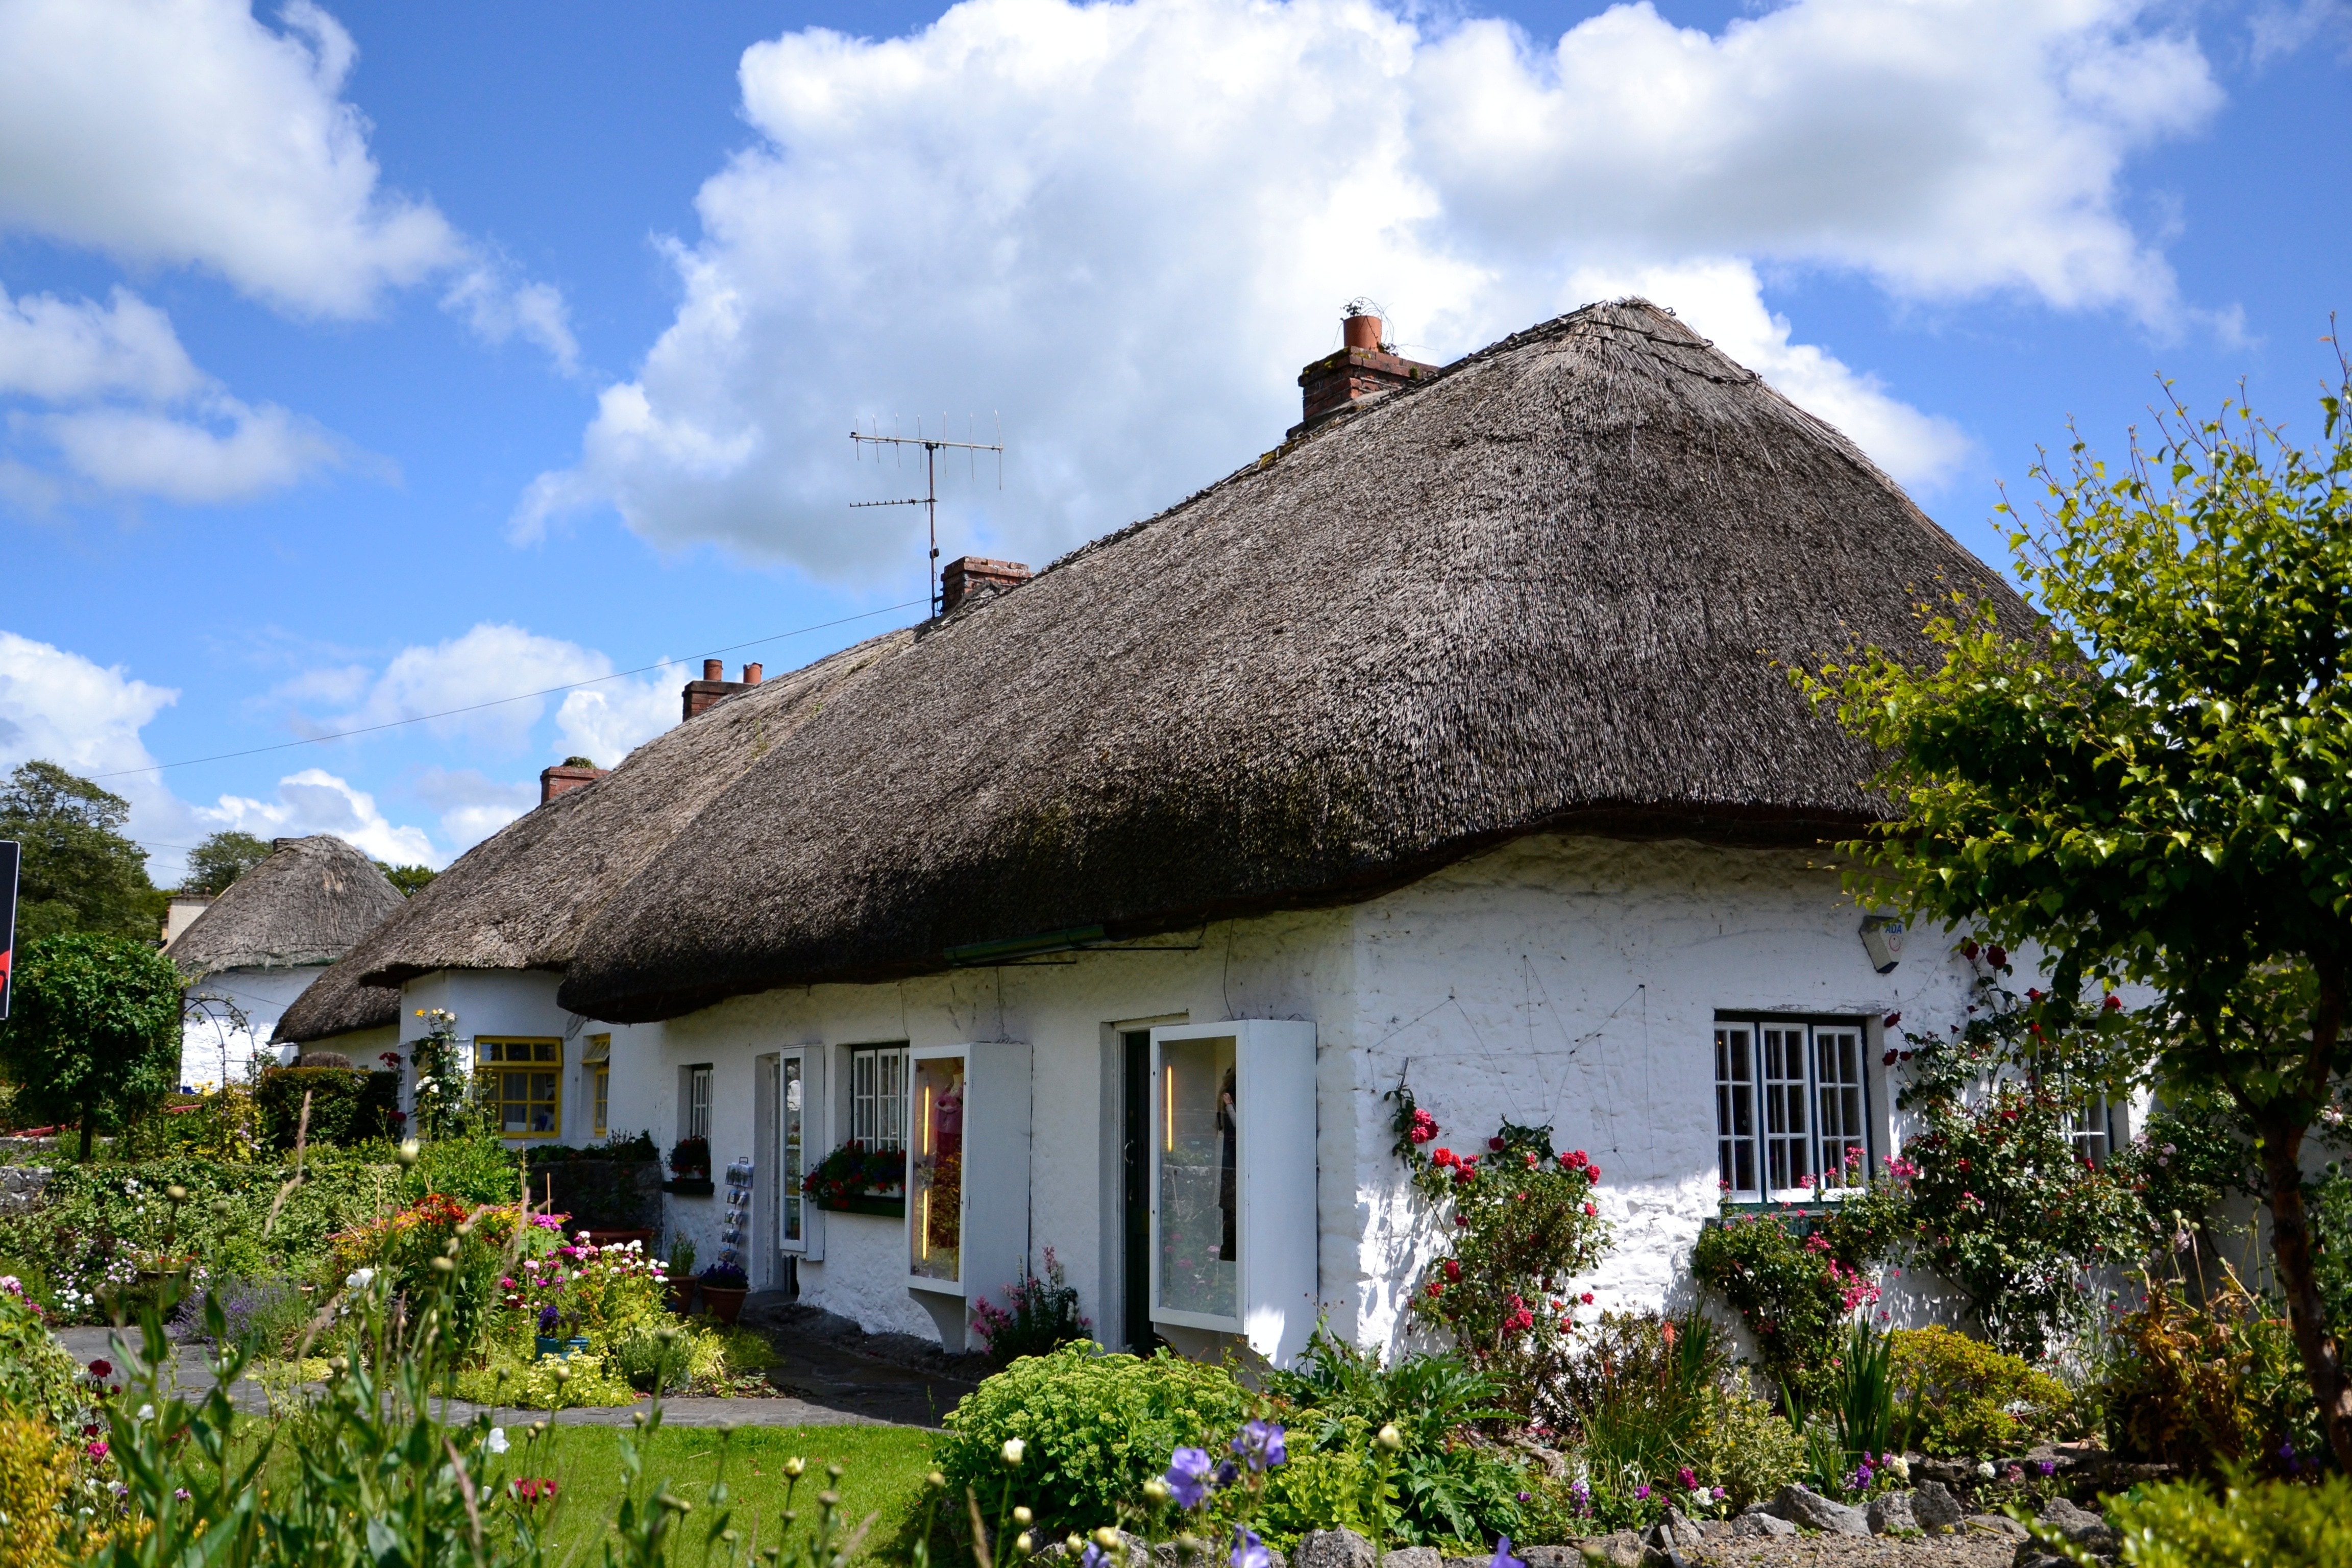 45 royalty free thatched roof images | Peakpx